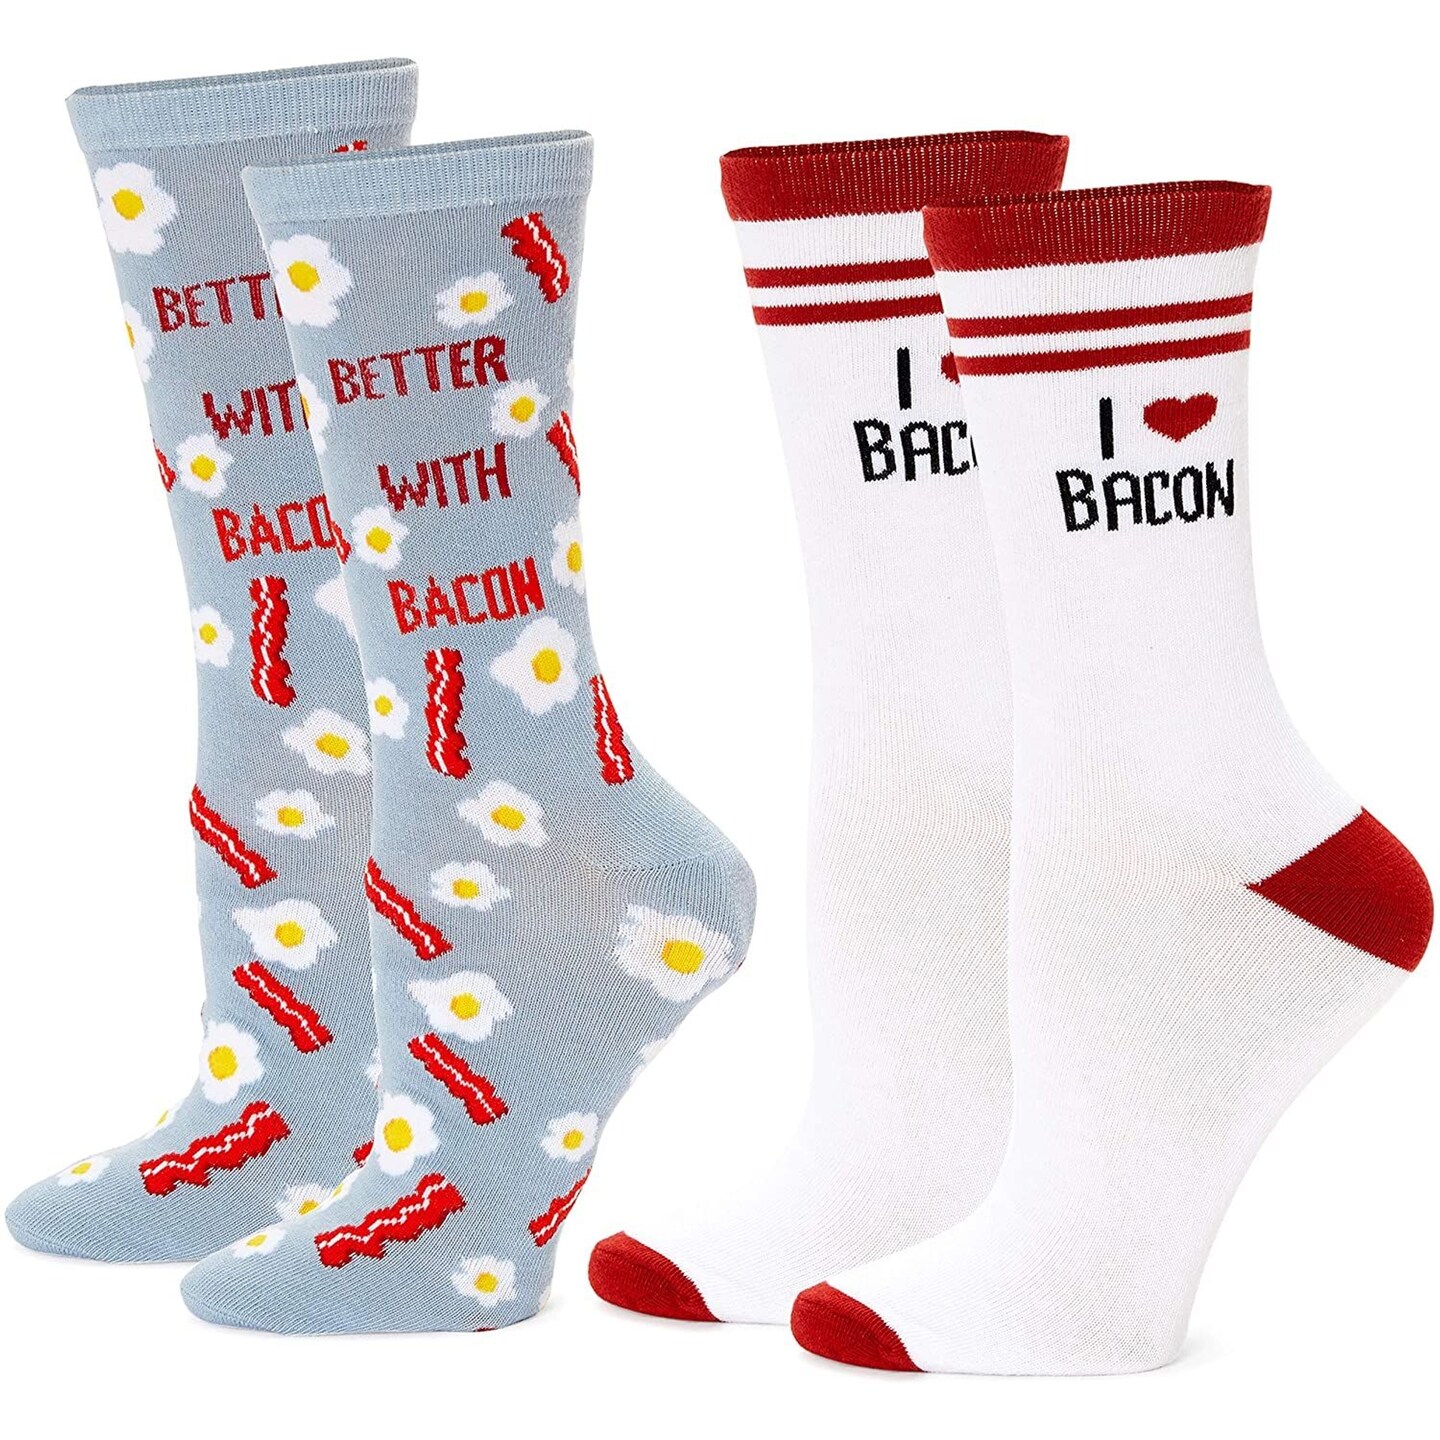 These Were A Gift W-Crew Socks